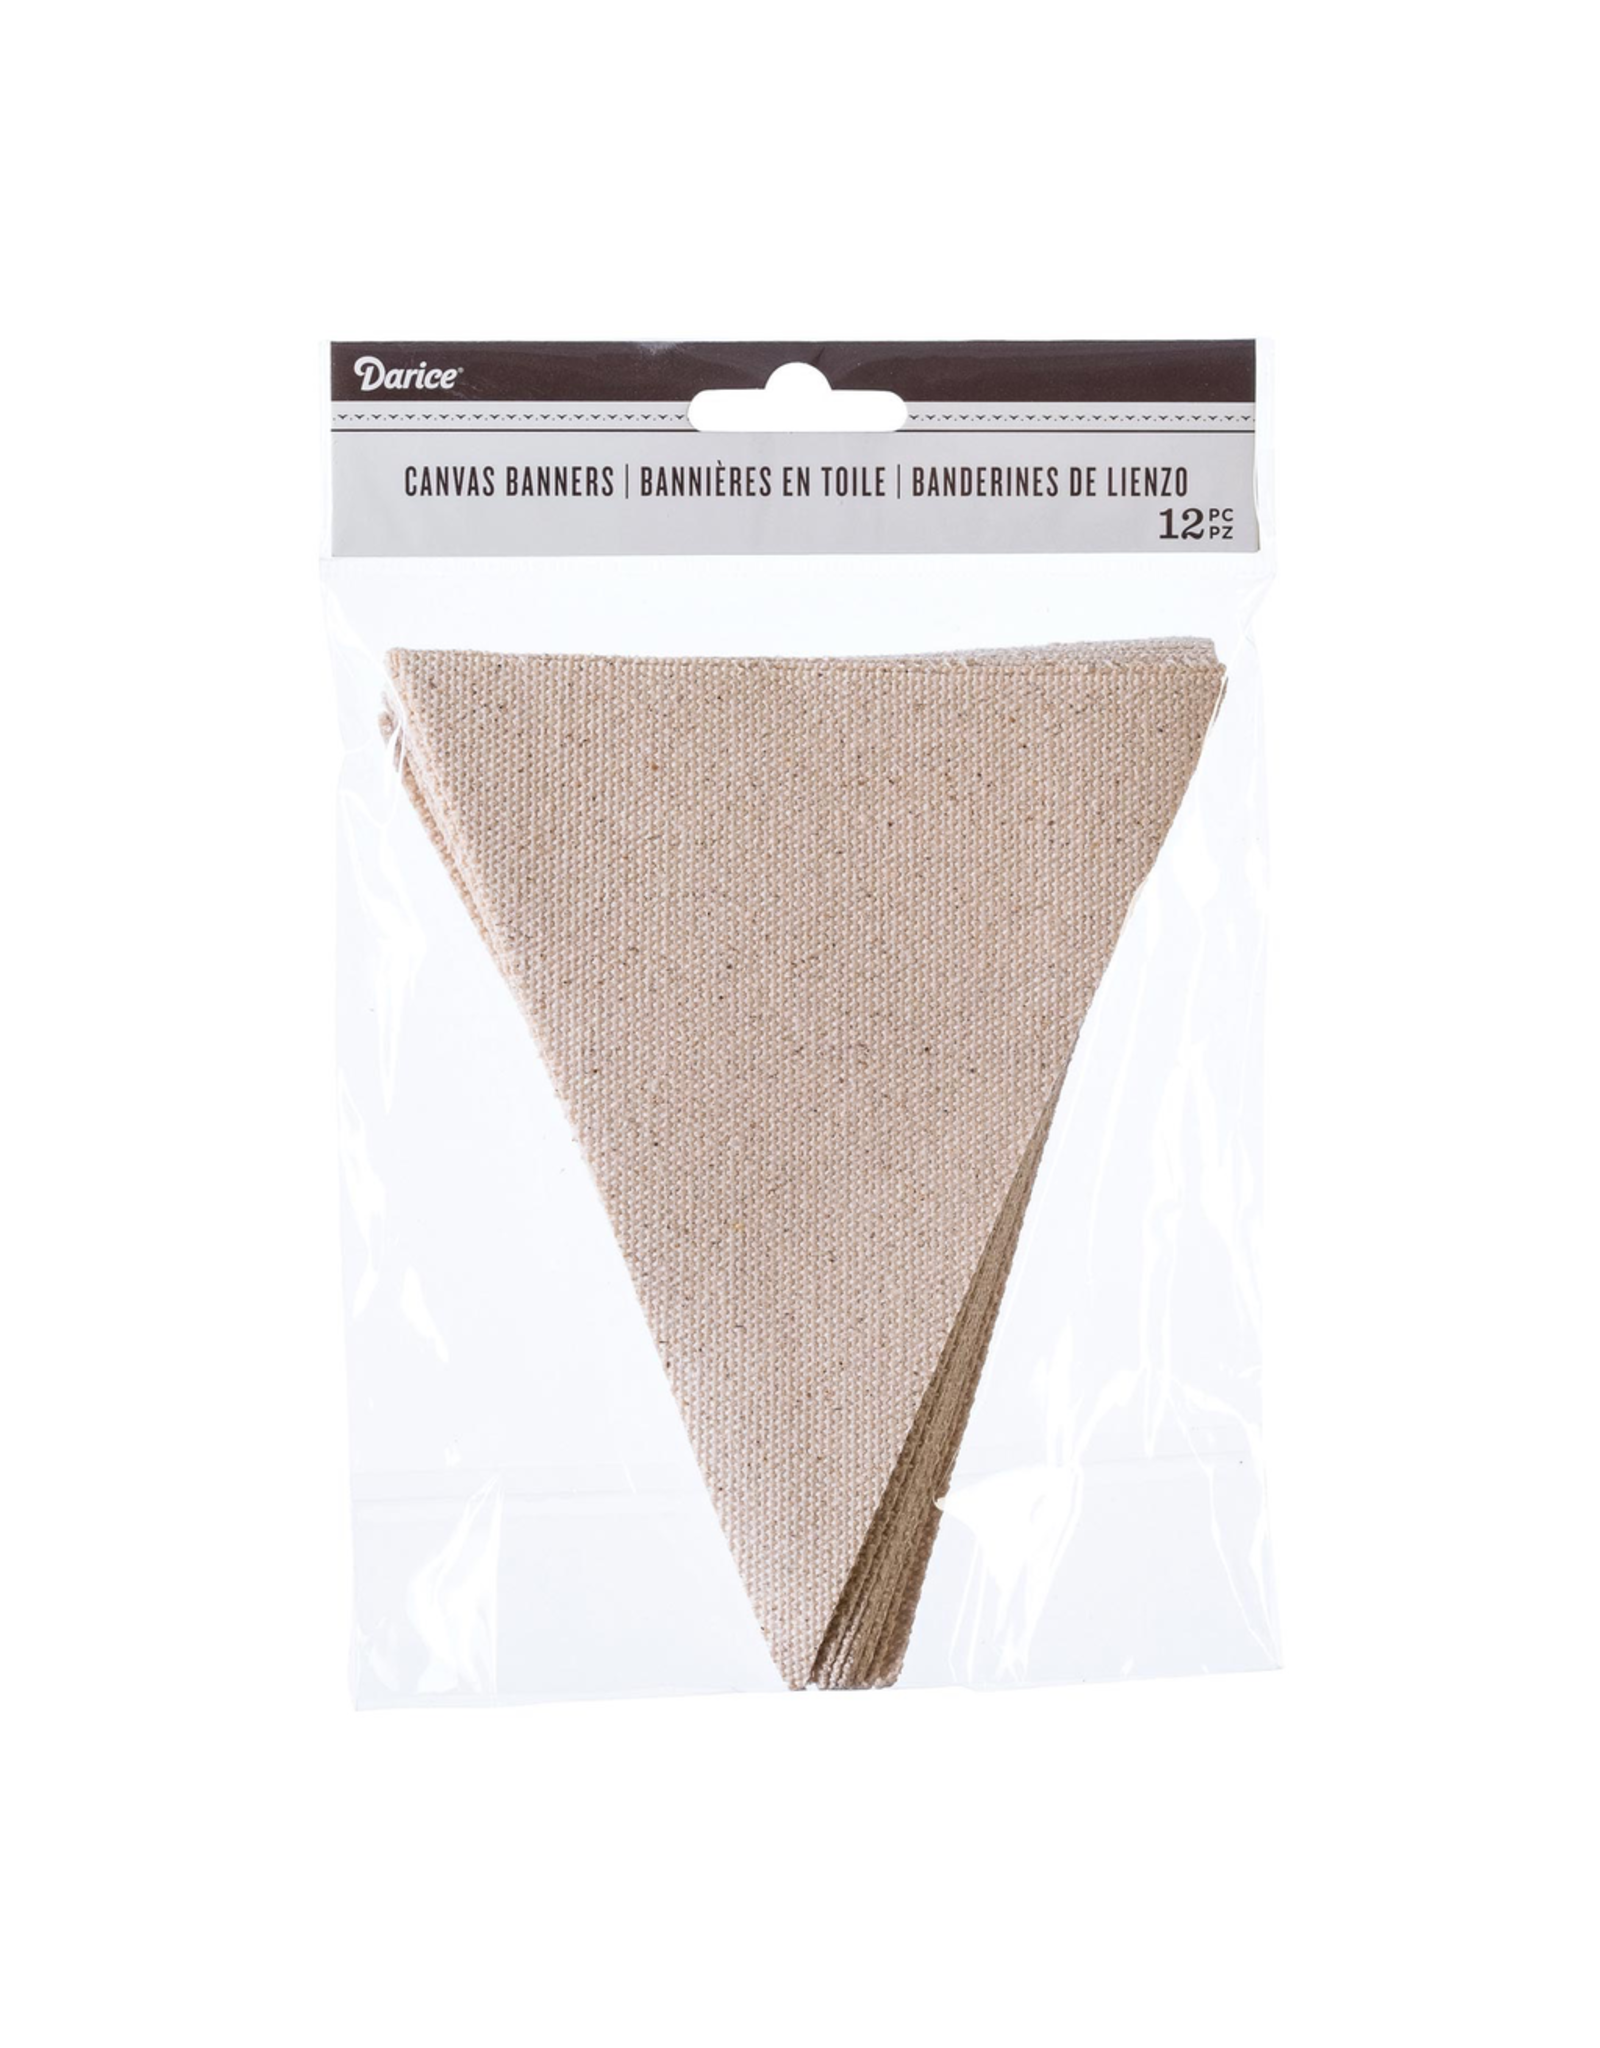 Darice Canvas Pennant Banners 4.75x6 Inch 12 Pack Natural